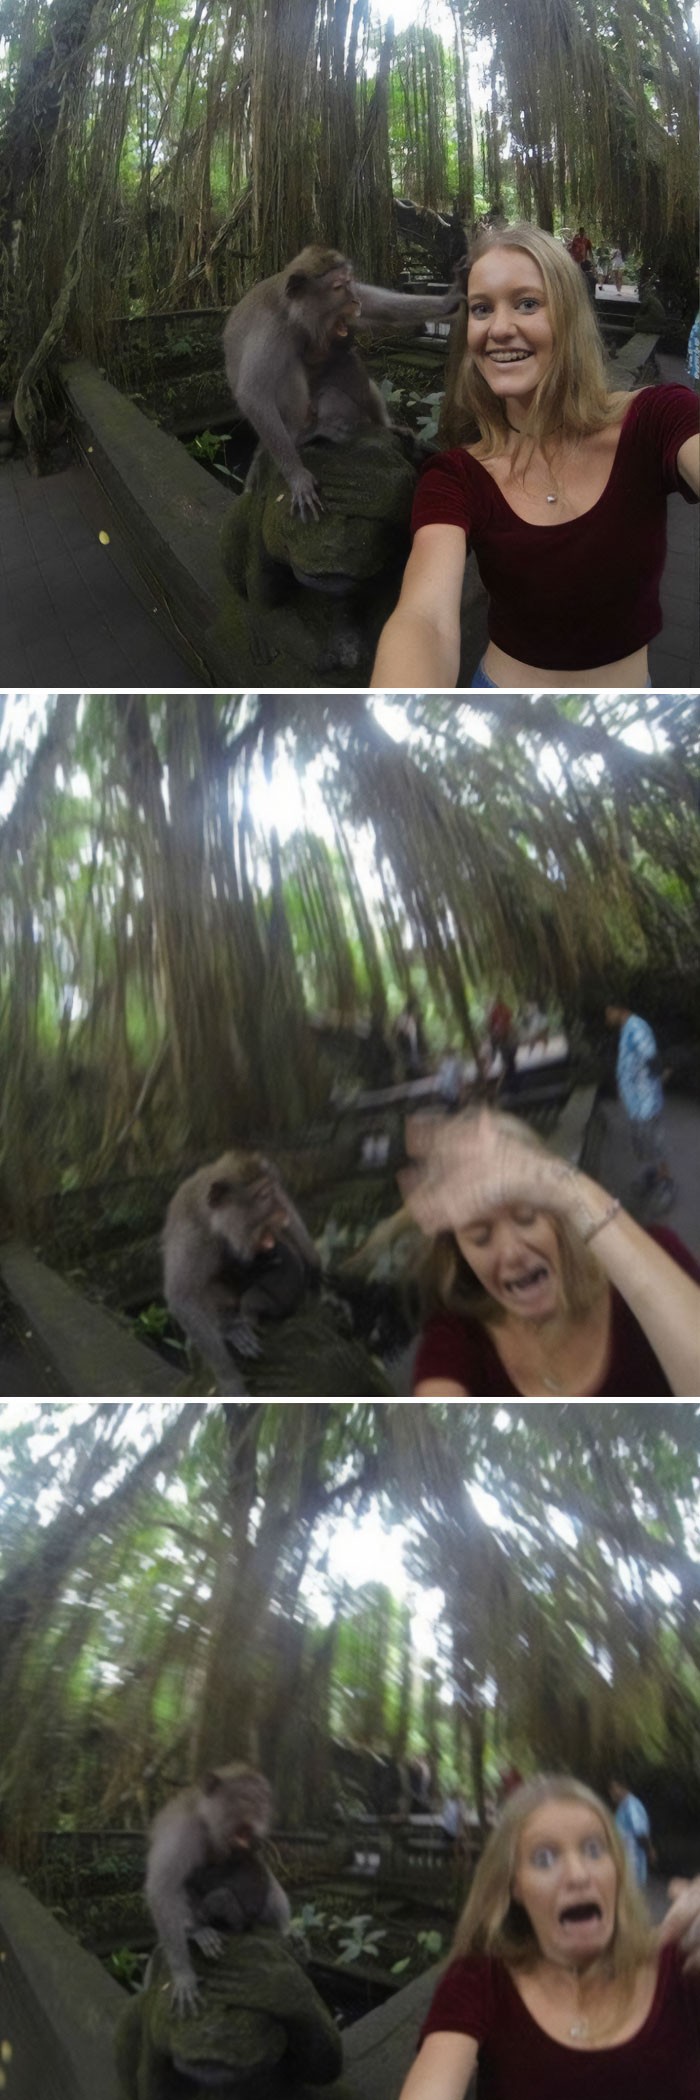 My Friend Tried Taking A Selfie With A Monkey. It Didn't End Well